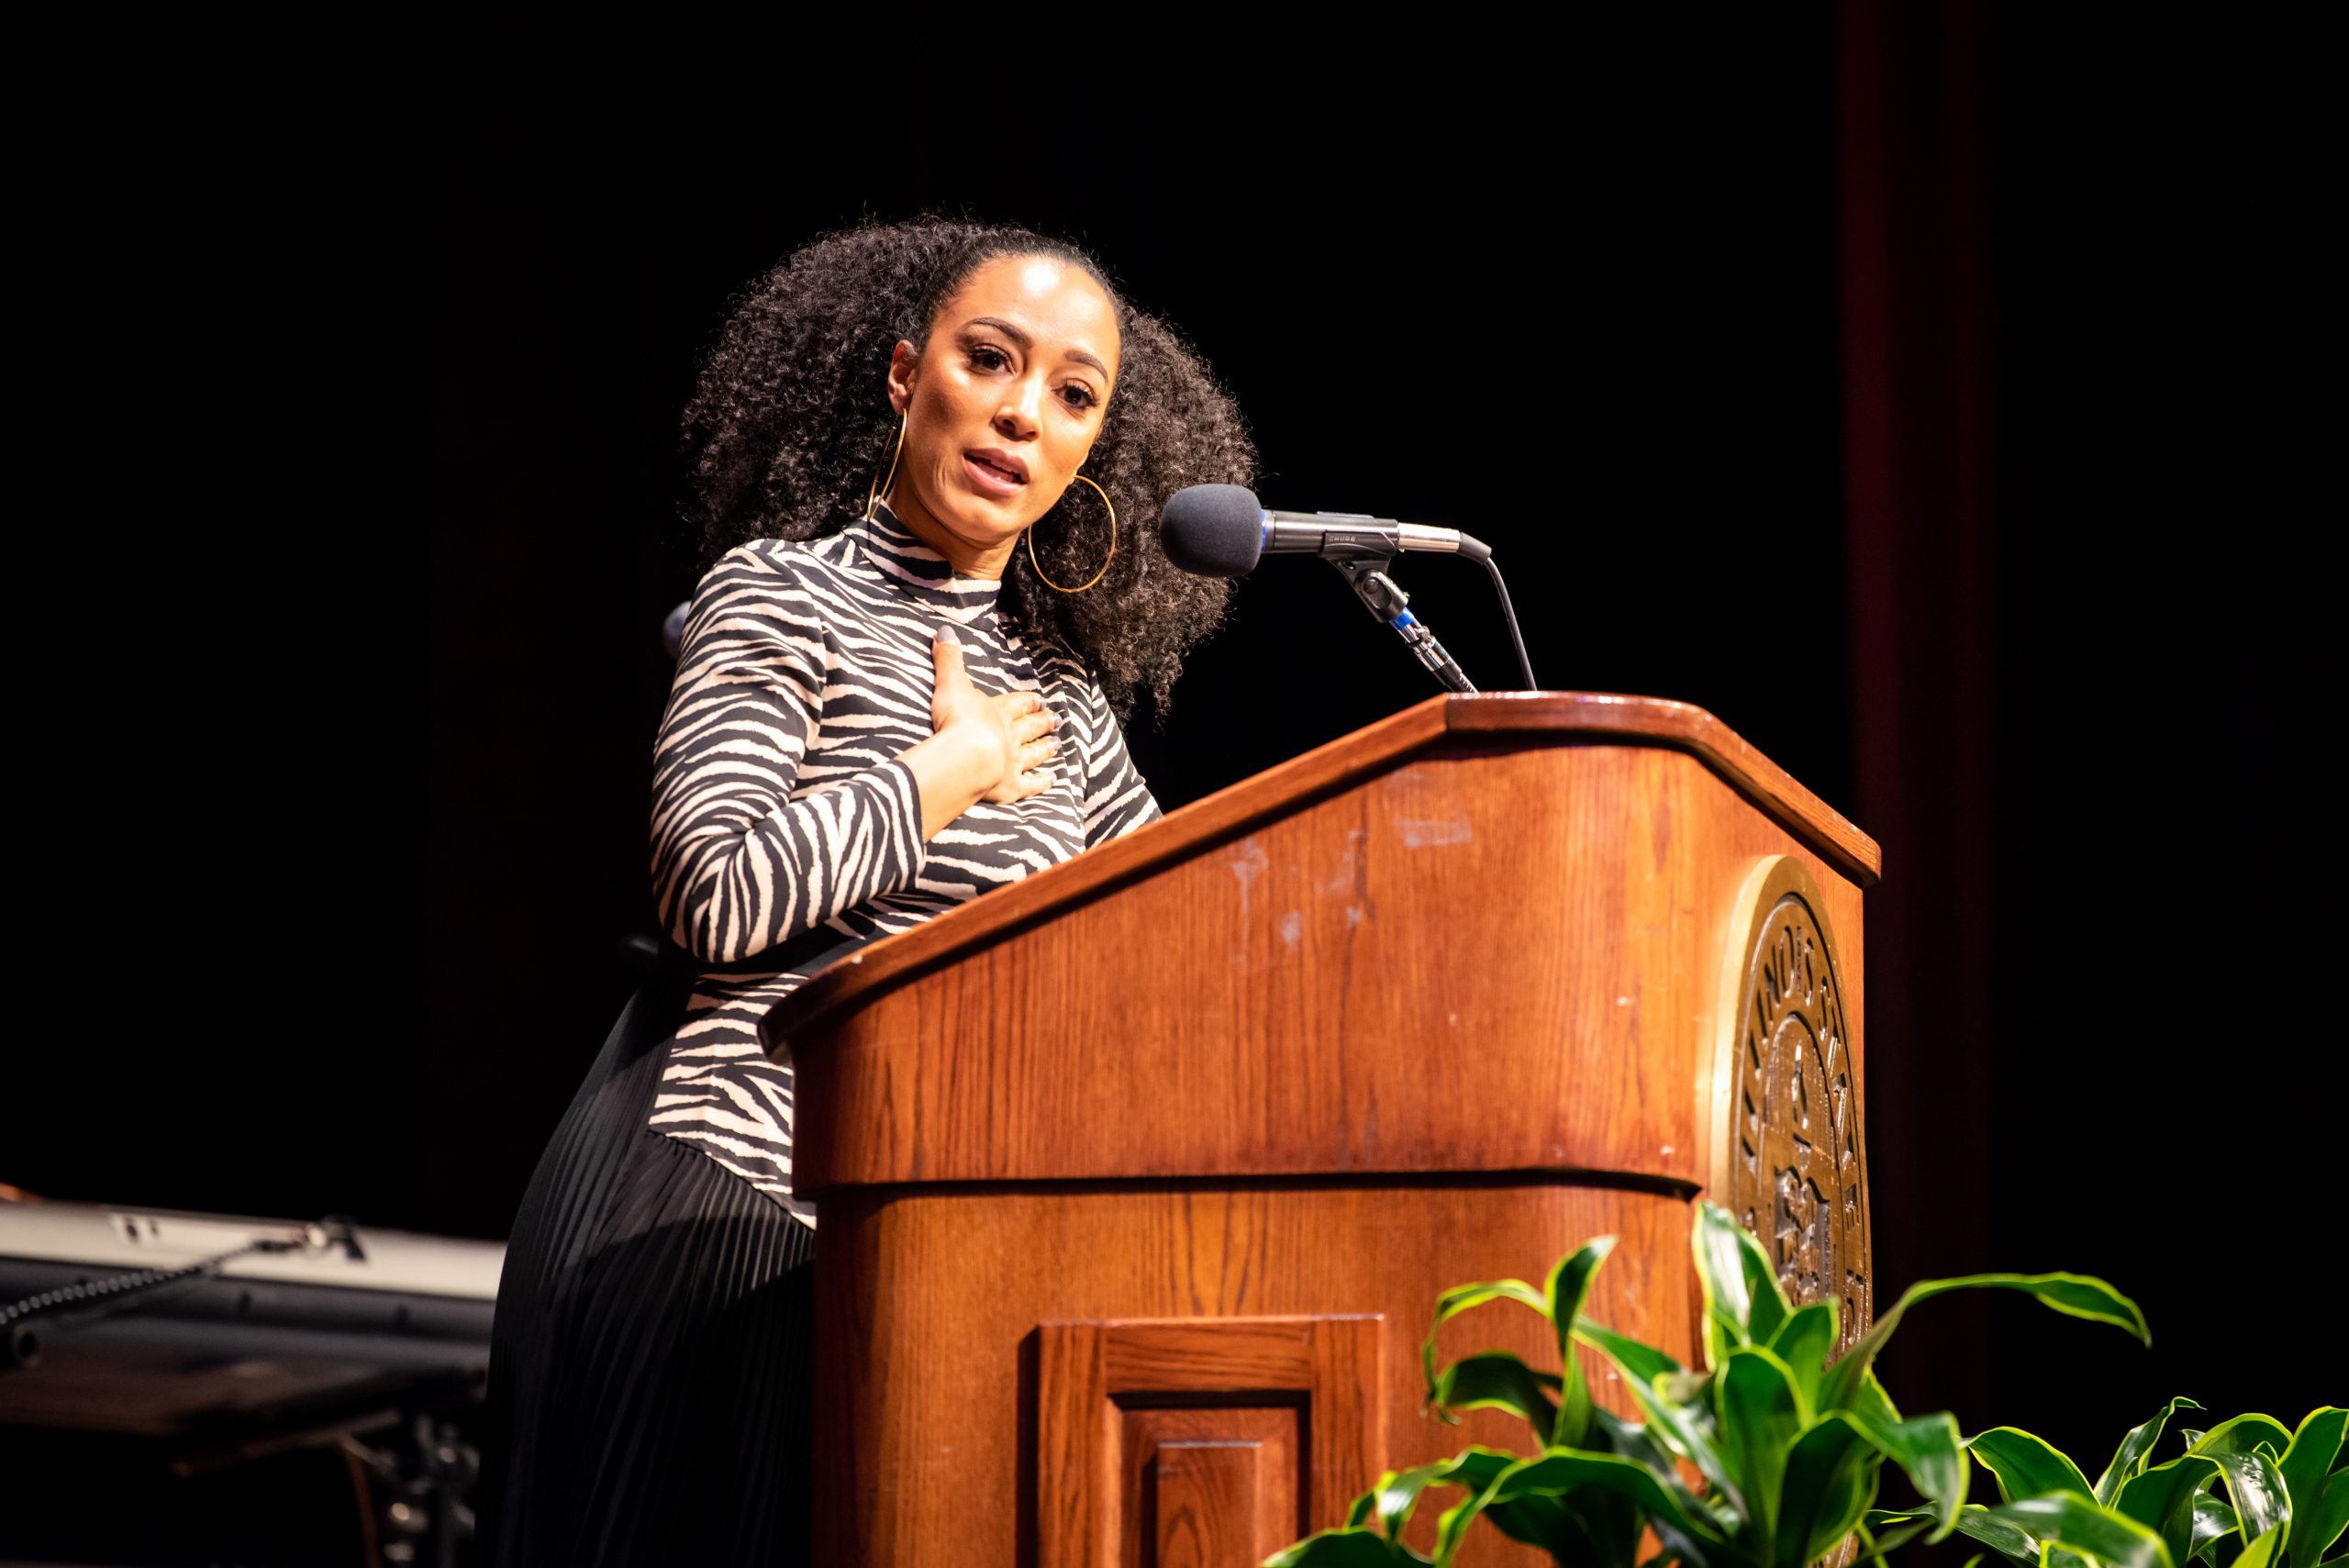 Political strategist and analyst Angela Rye spoke at the Martin Luther King Jr. Cultural Dinner.